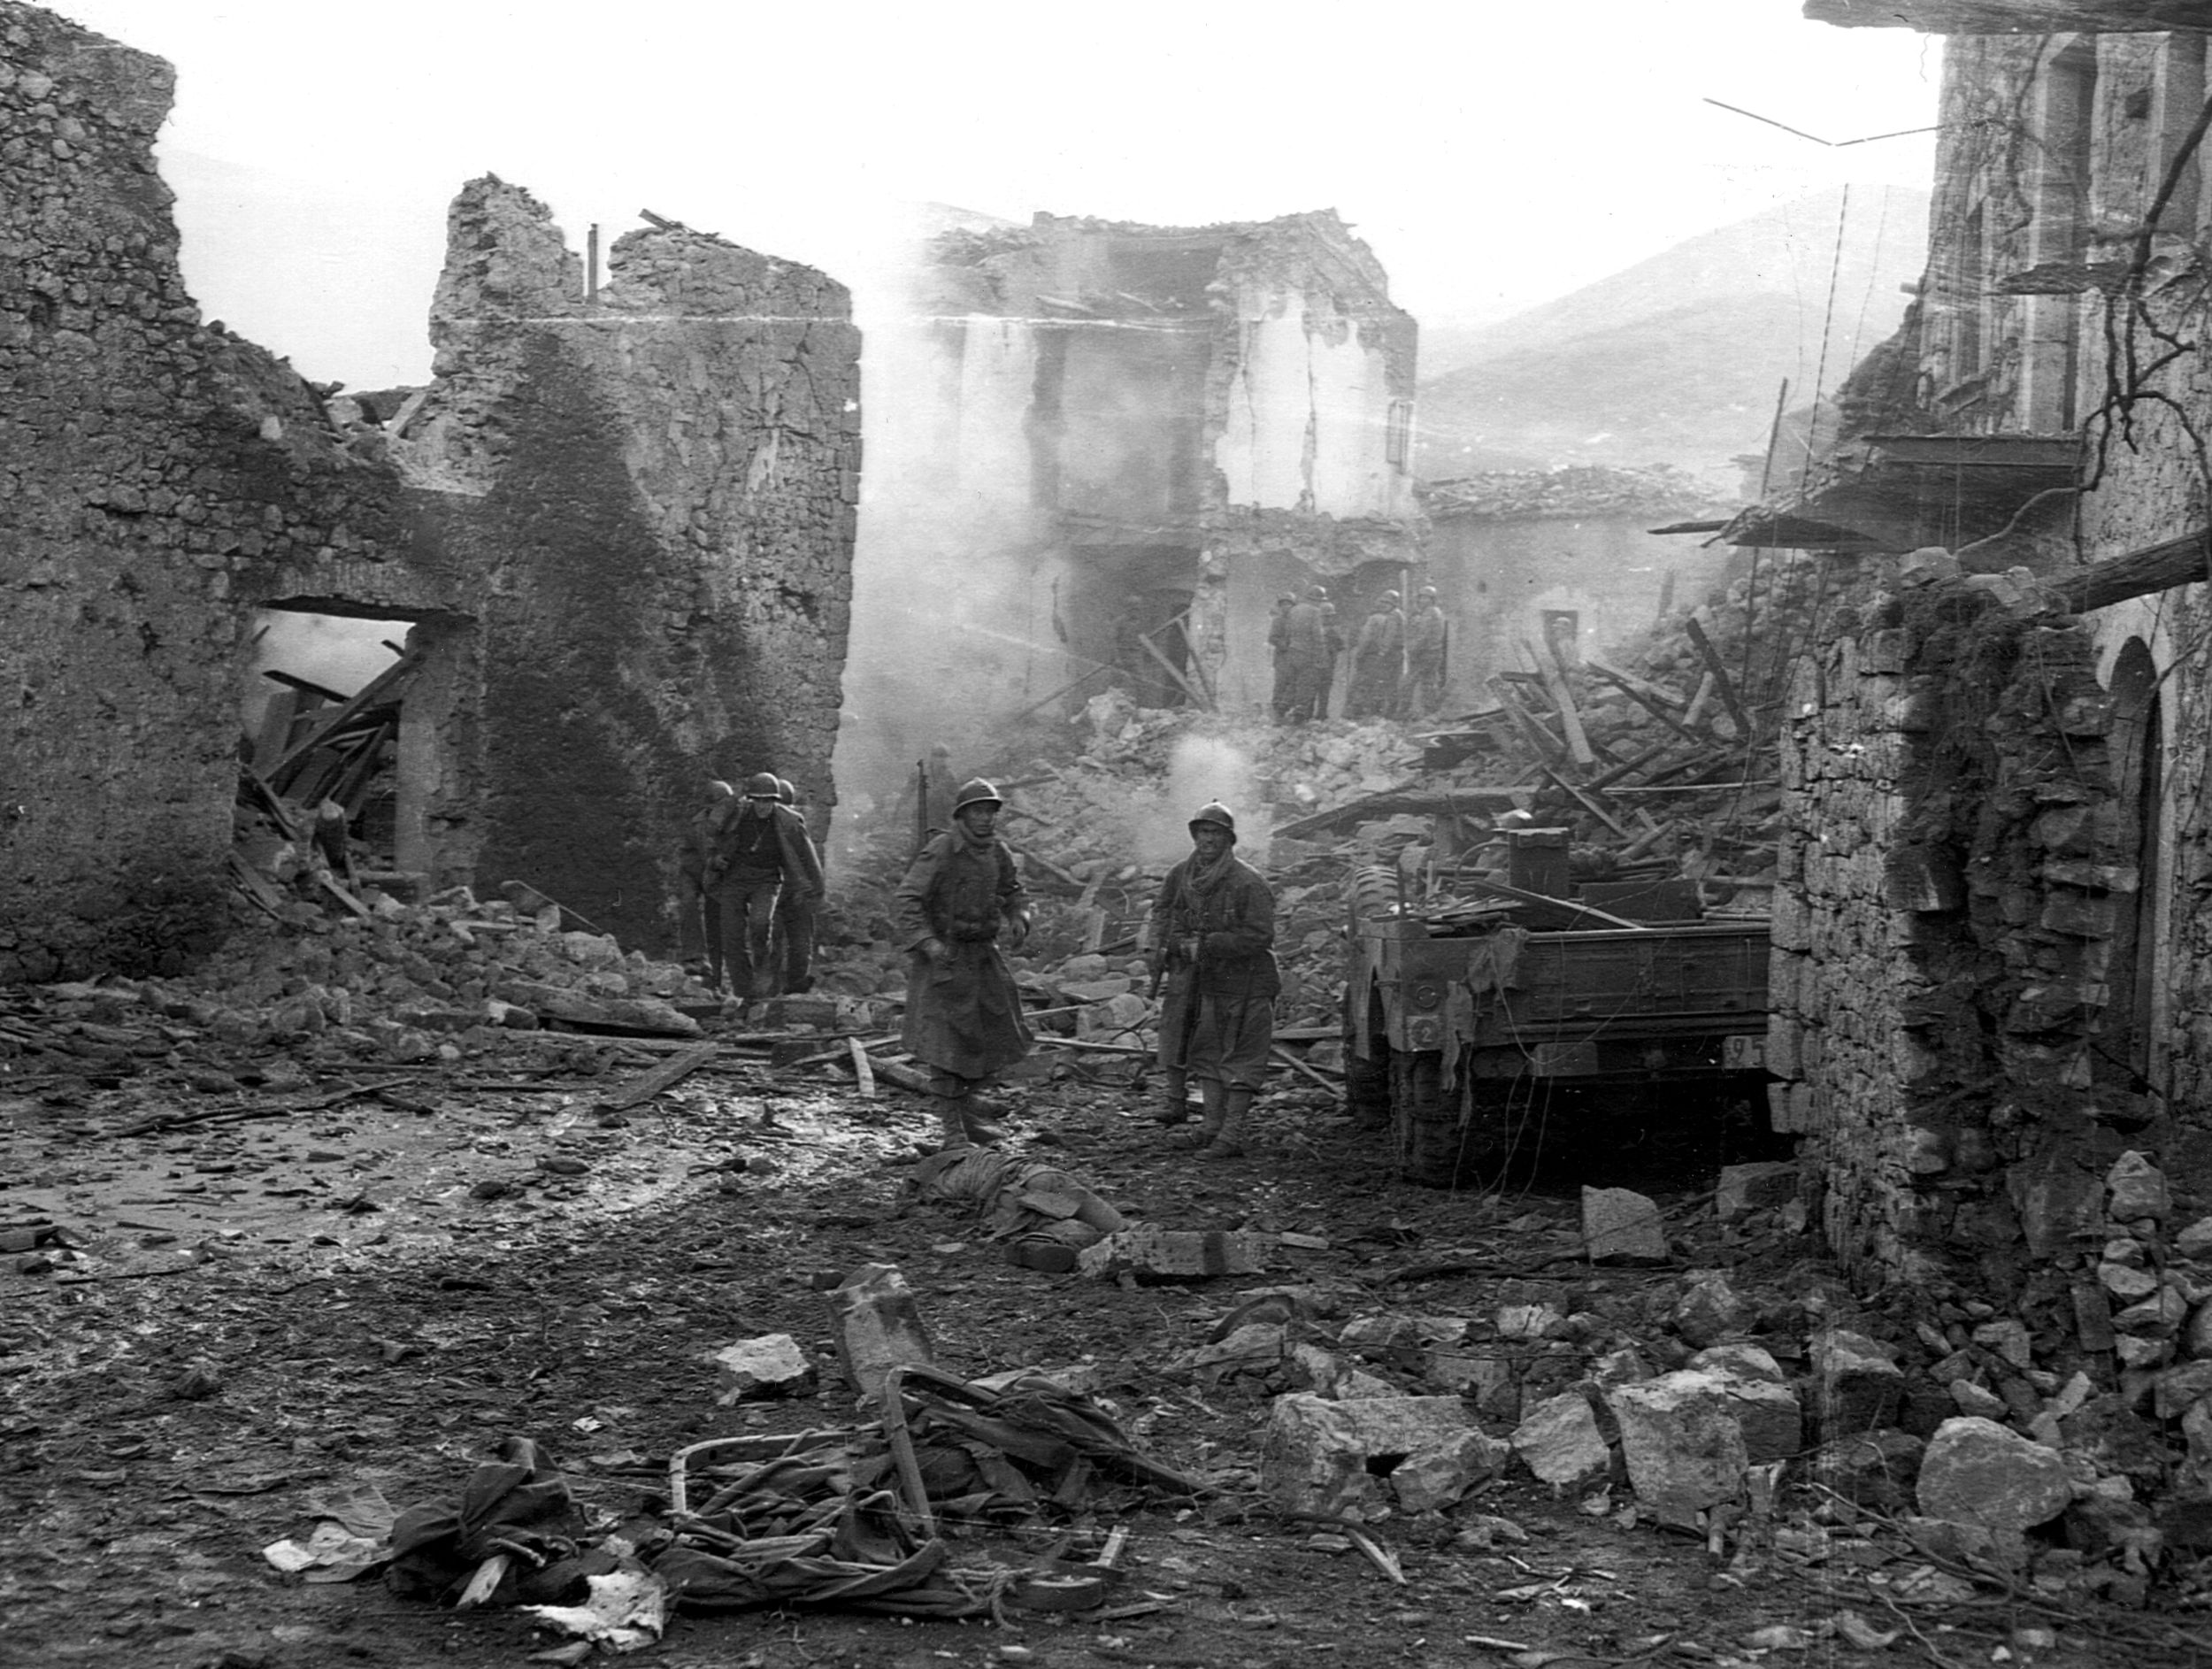 As the Italian Campaign wore on, the Luftwaffe appeared in force on fewer and fewer occasions. Here, however, debris still smolders in the streets of a town bombed and strafed by German aircraft moments before.